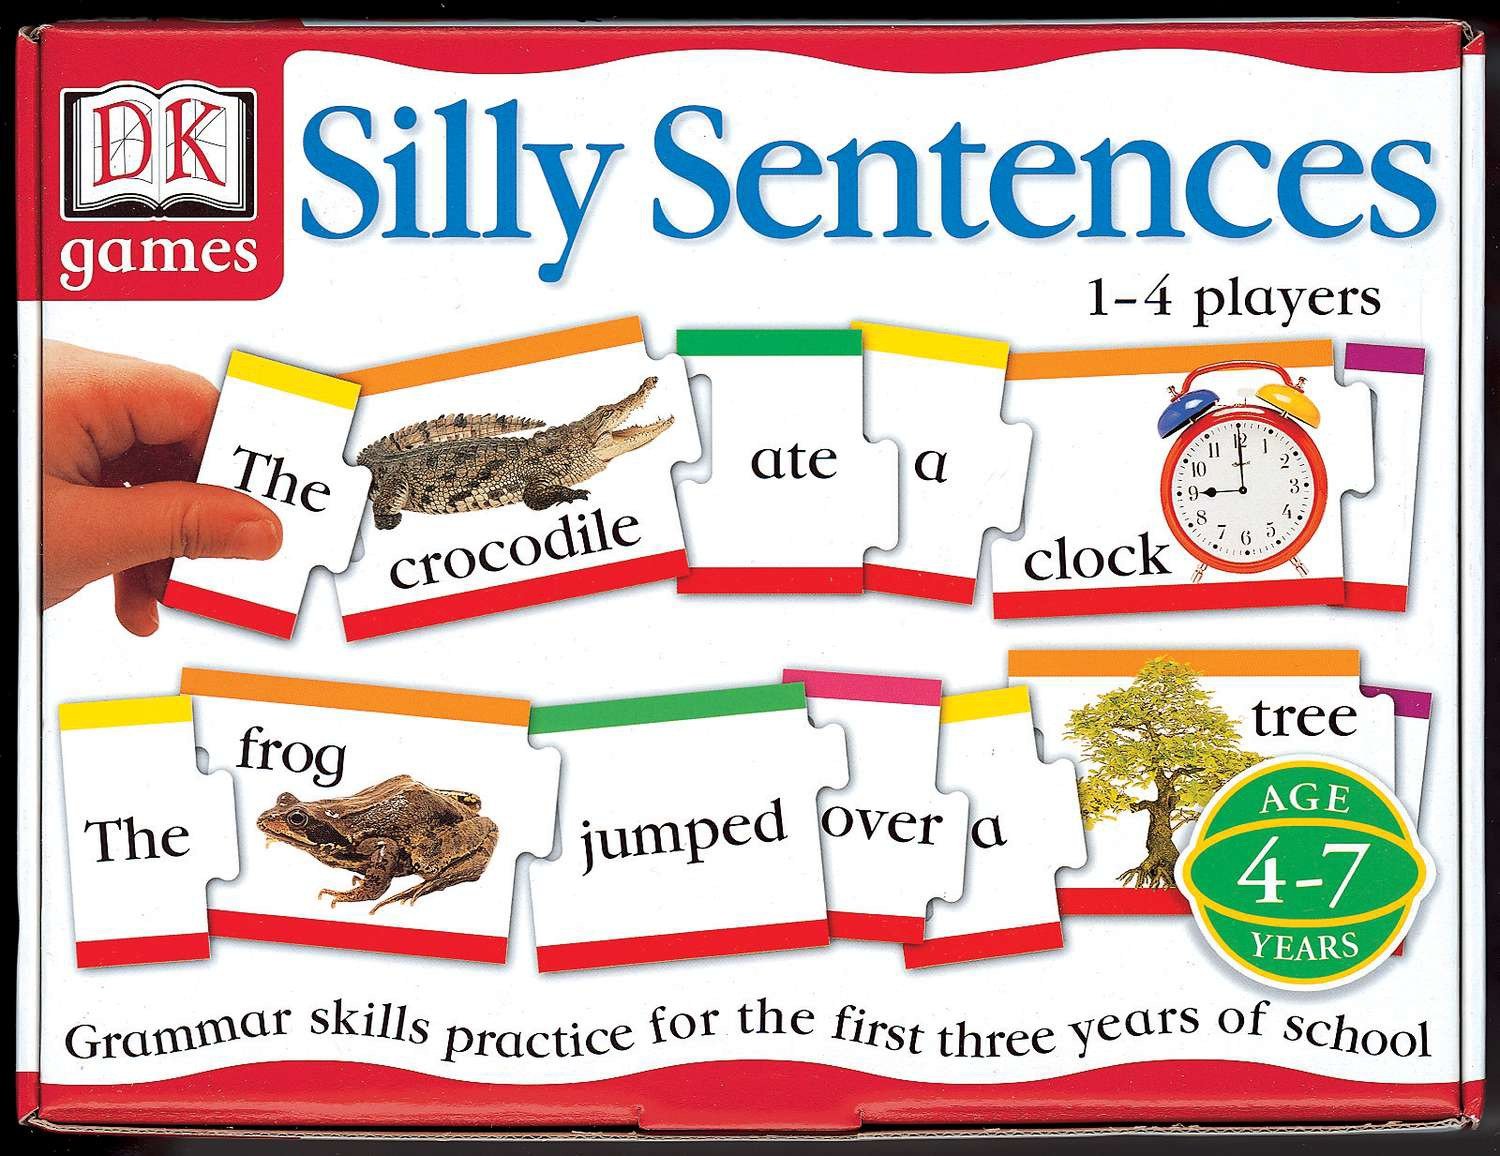 DK Toys & Games Silly Sentences